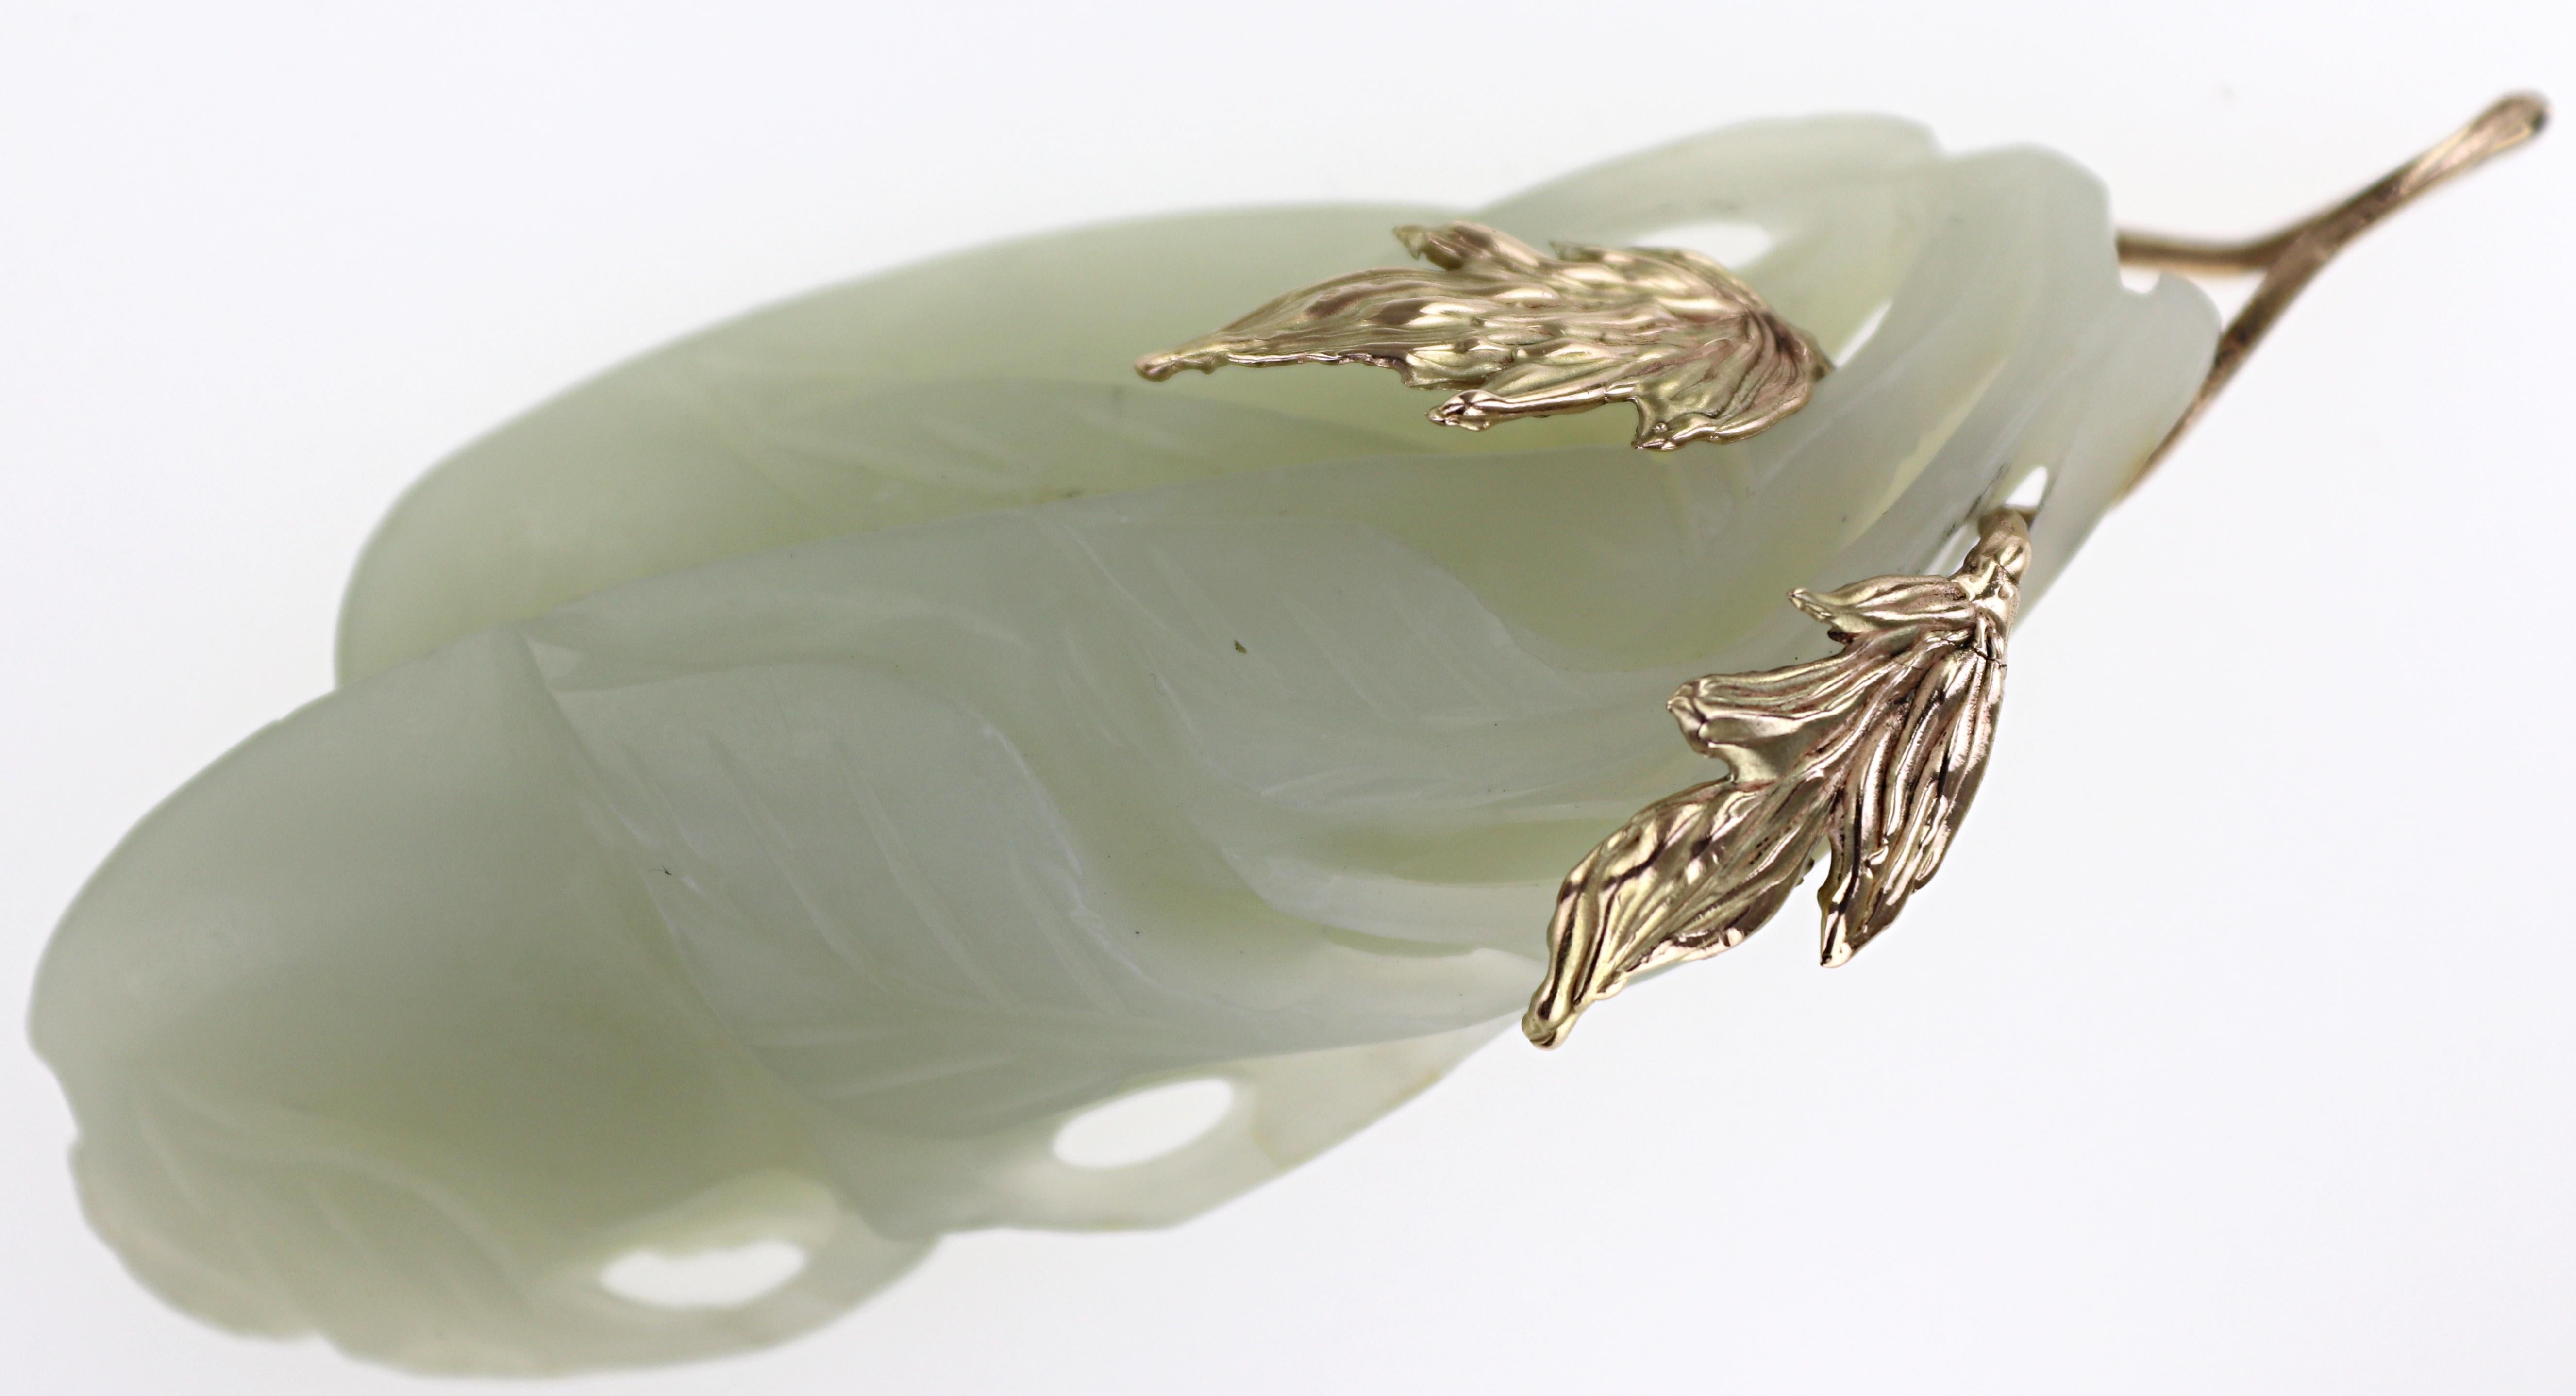 Featuring (1) carved nephrite jade, 65.8 X 29.1 X 13.2 mm, depicting gourds and leaves, completed by a 14k yellow gold wire leaf bail, Gross weight 32.04 grams.